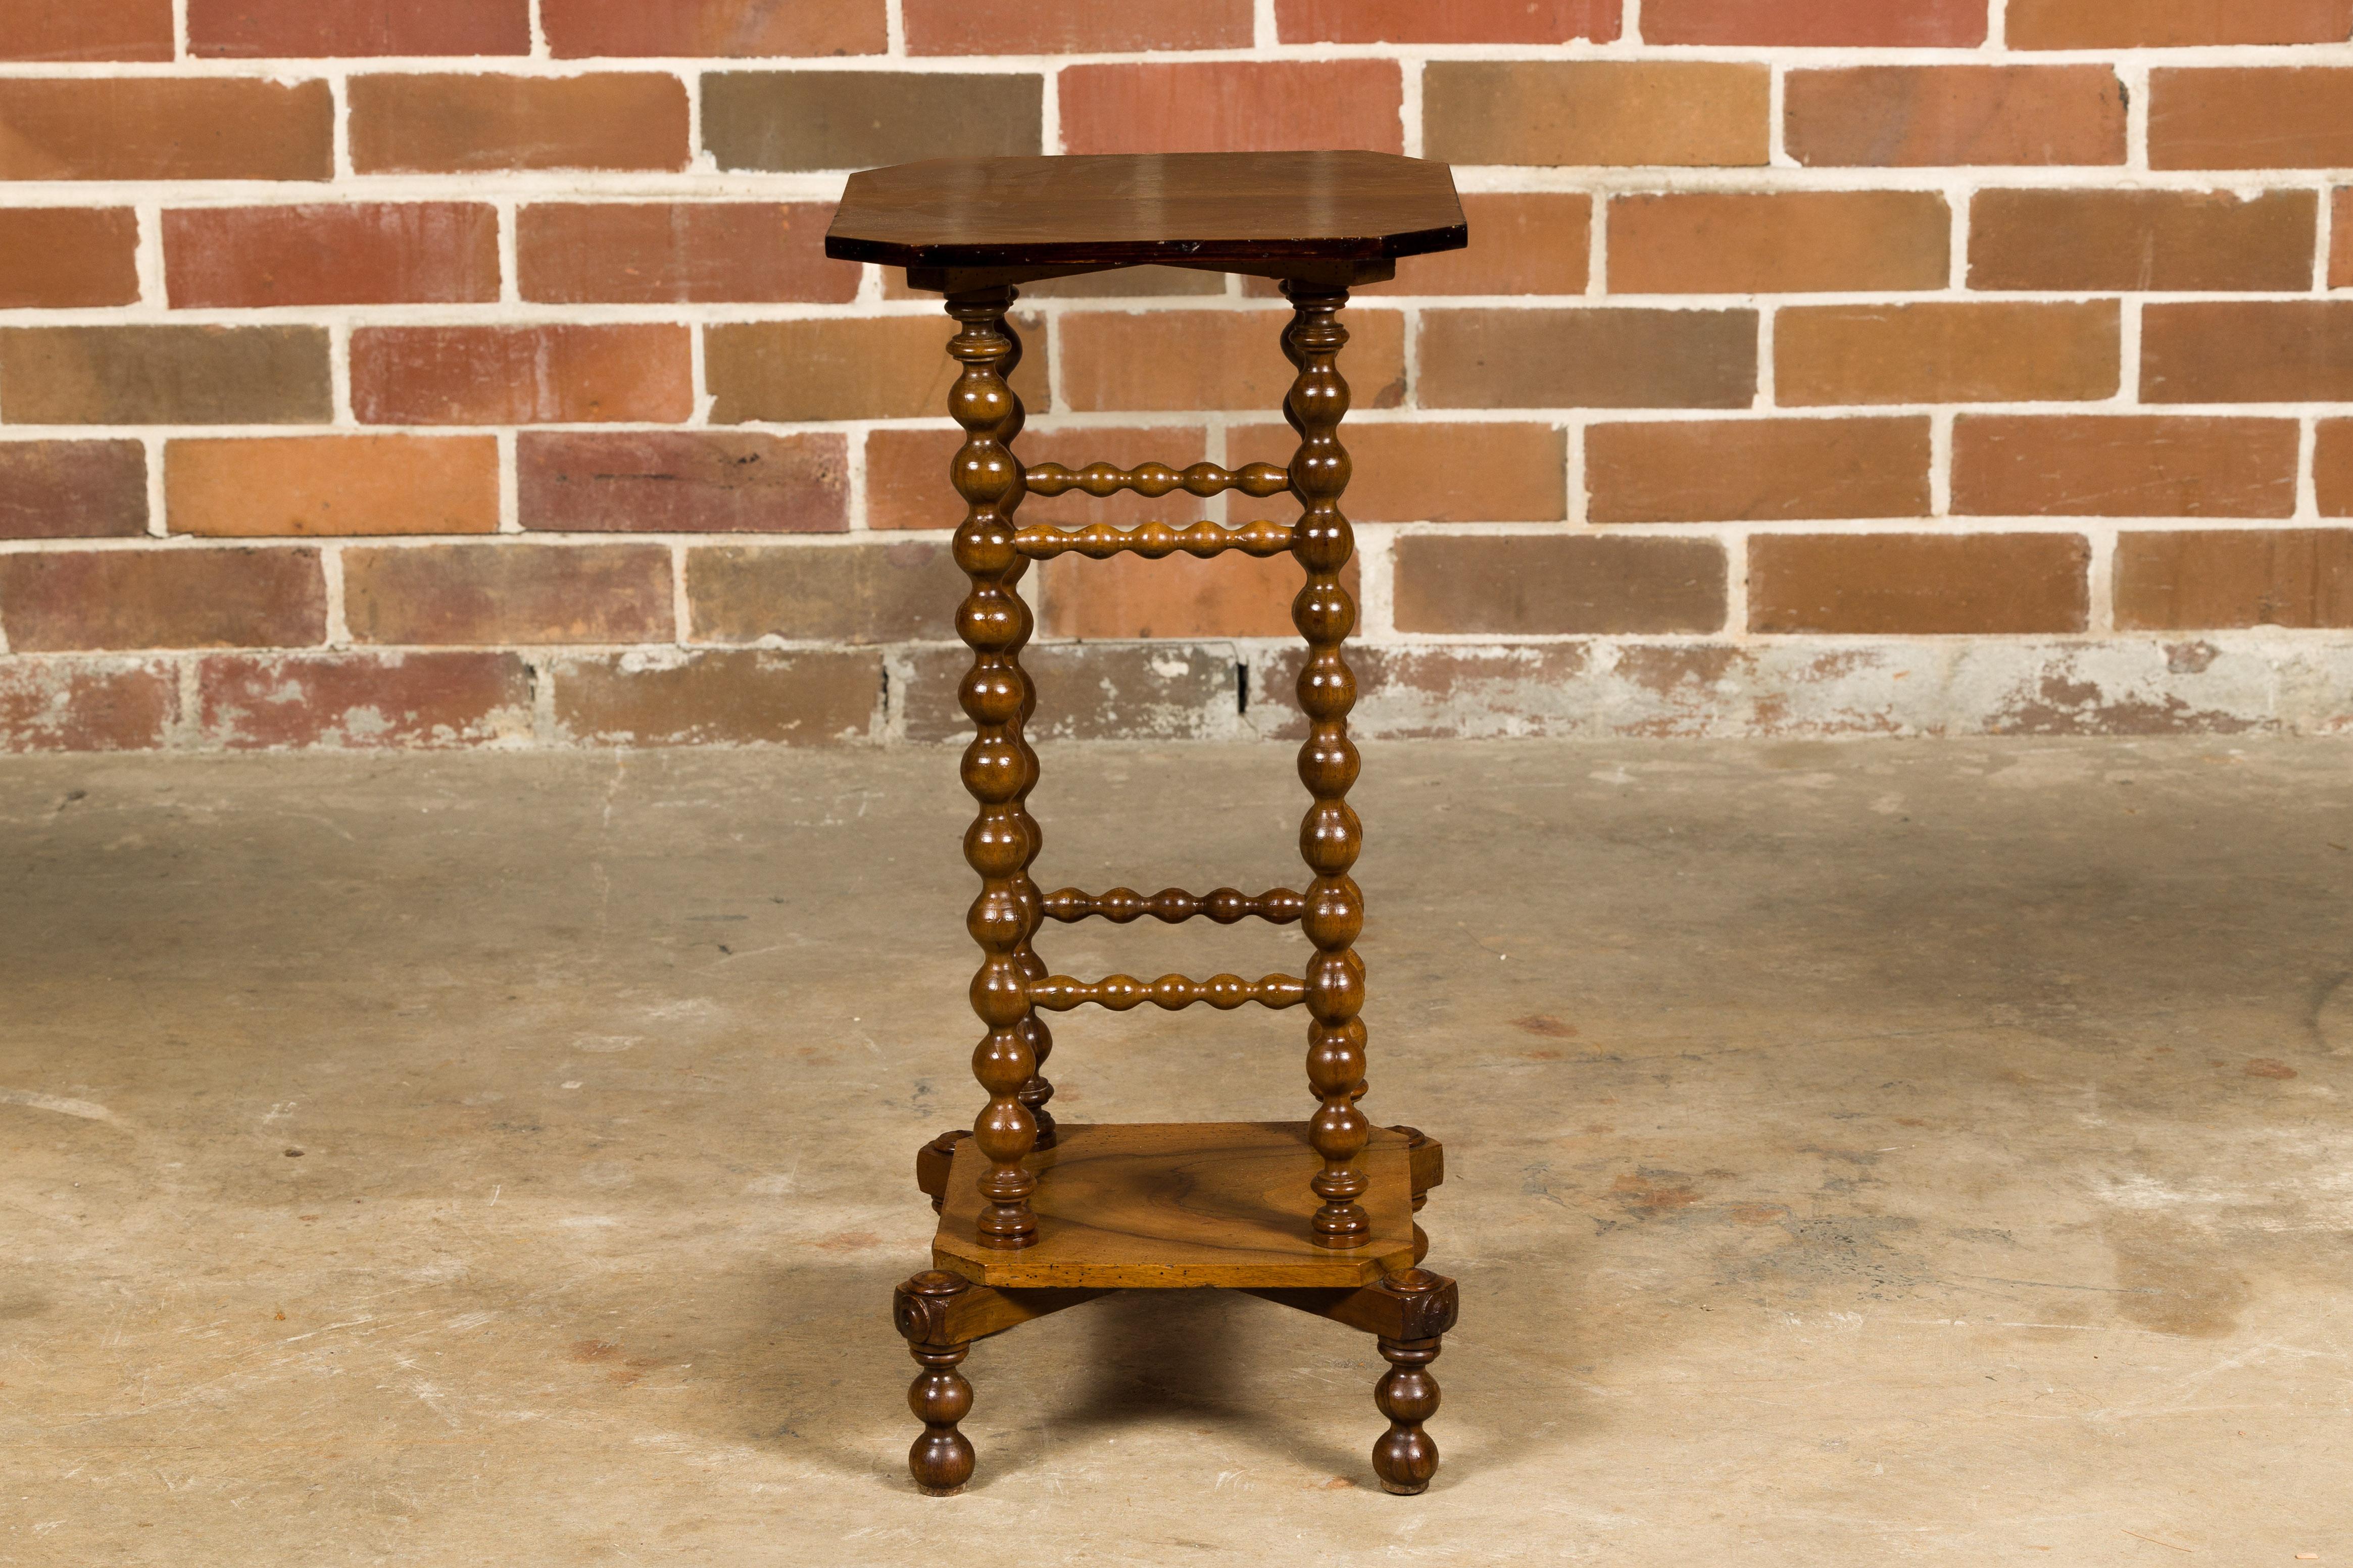 A French walnut bobbin legs guéridon side table from circa 1920-1930, with lower shelf. This delightful French walnut guéridon side table, dating from the 1920s to 1930s, effortlessly blends elegance and functionality. Its petite size and charming